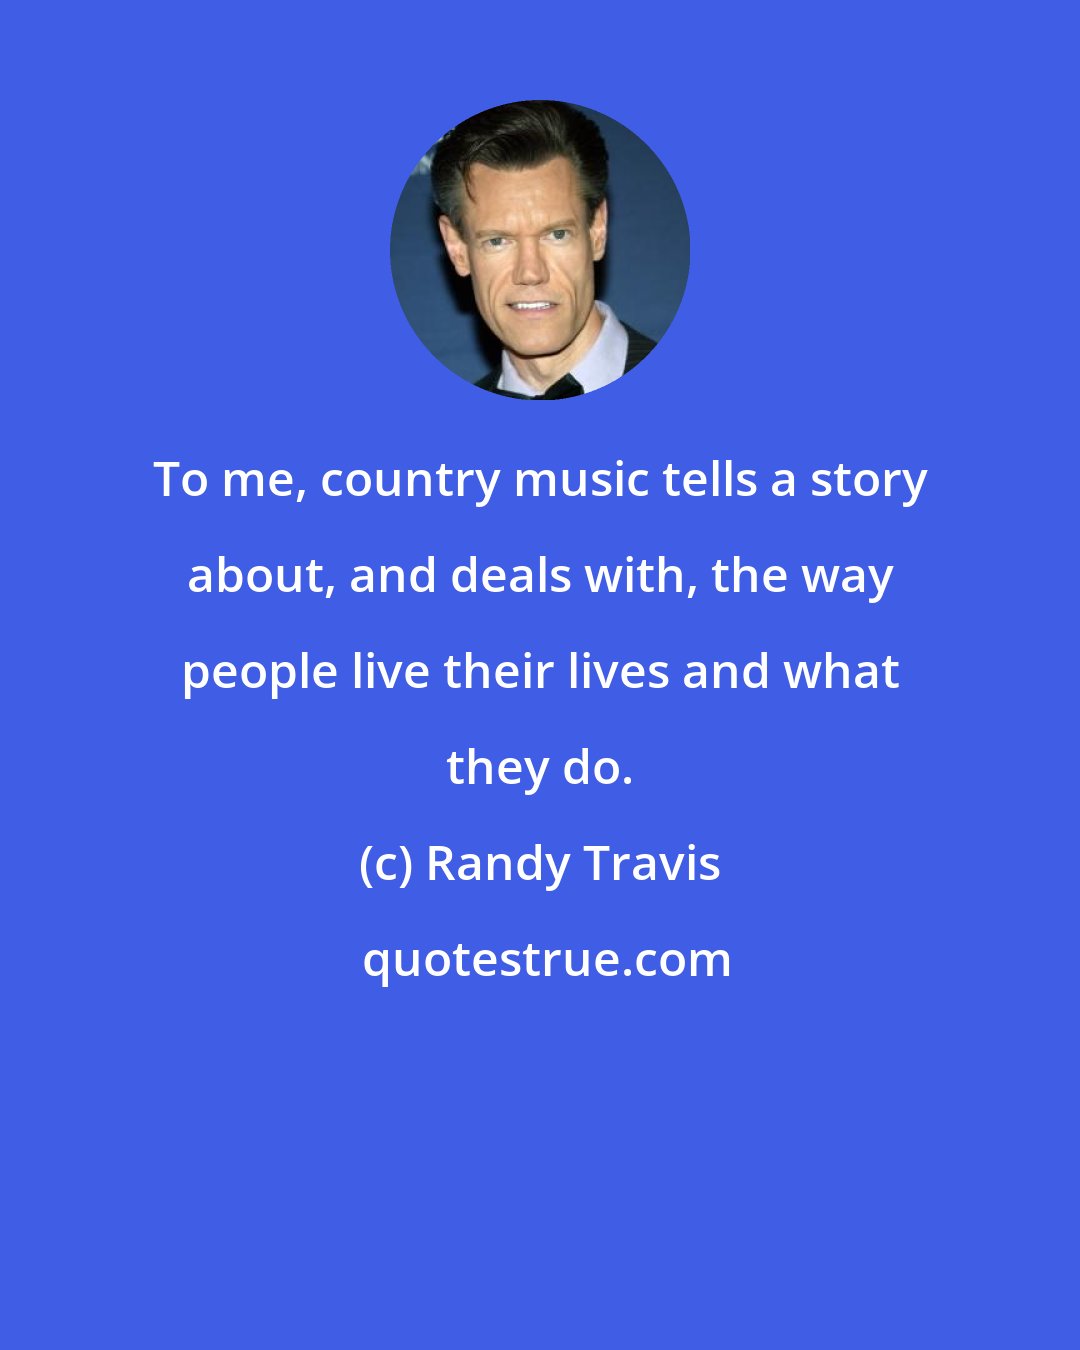 Randy Travis: To me, country music tells a story about, and deals with, the way people live their lives and what they do.